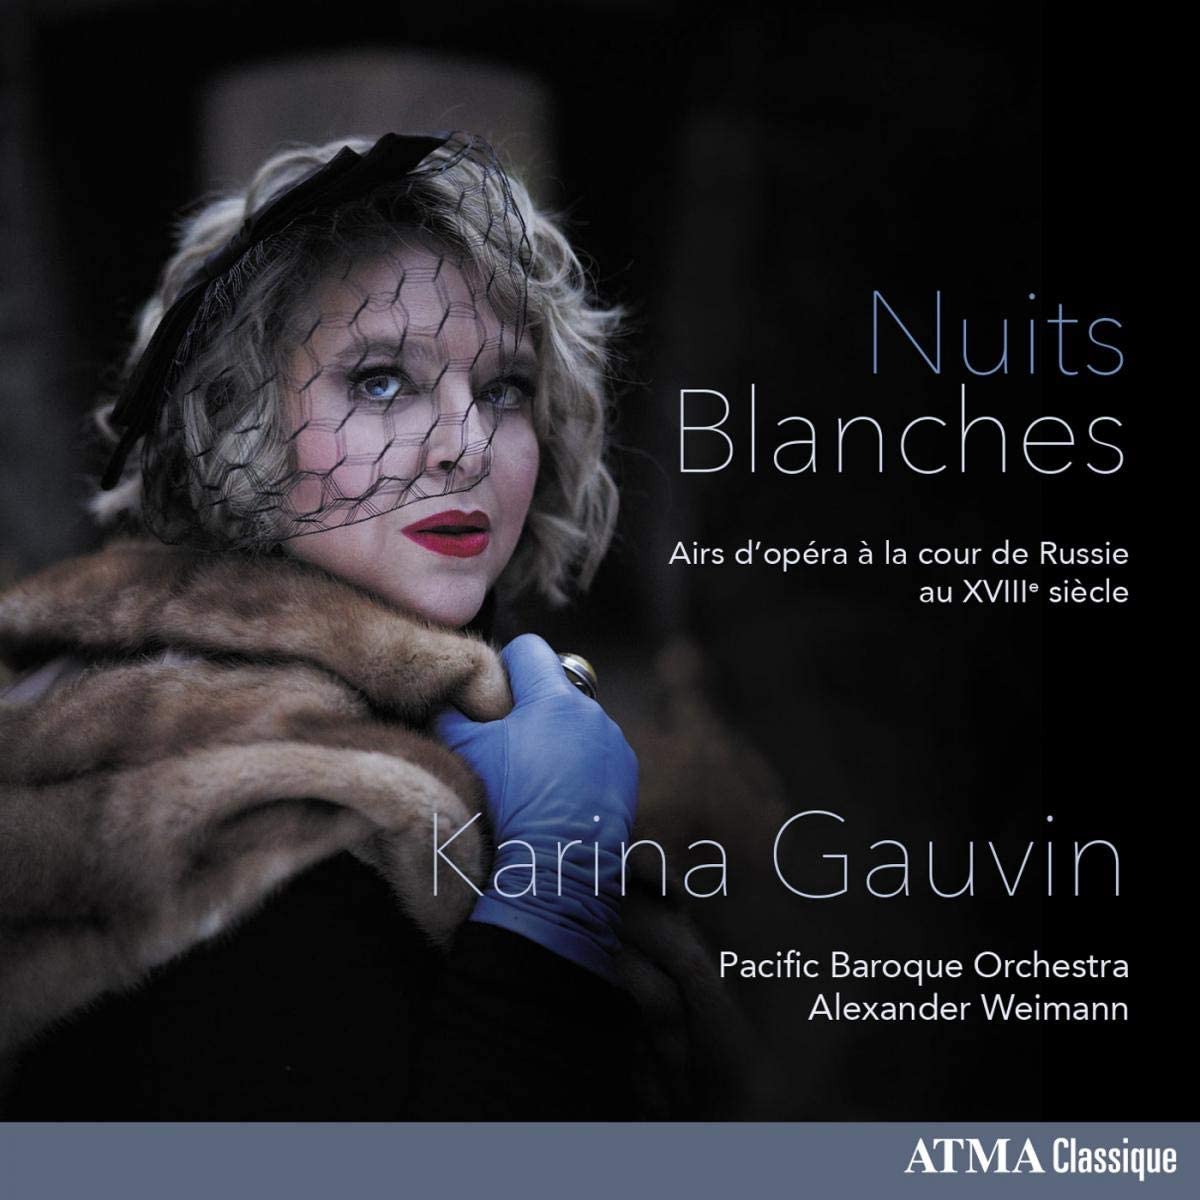 Karina Gauvin Nuits blanches CD cover